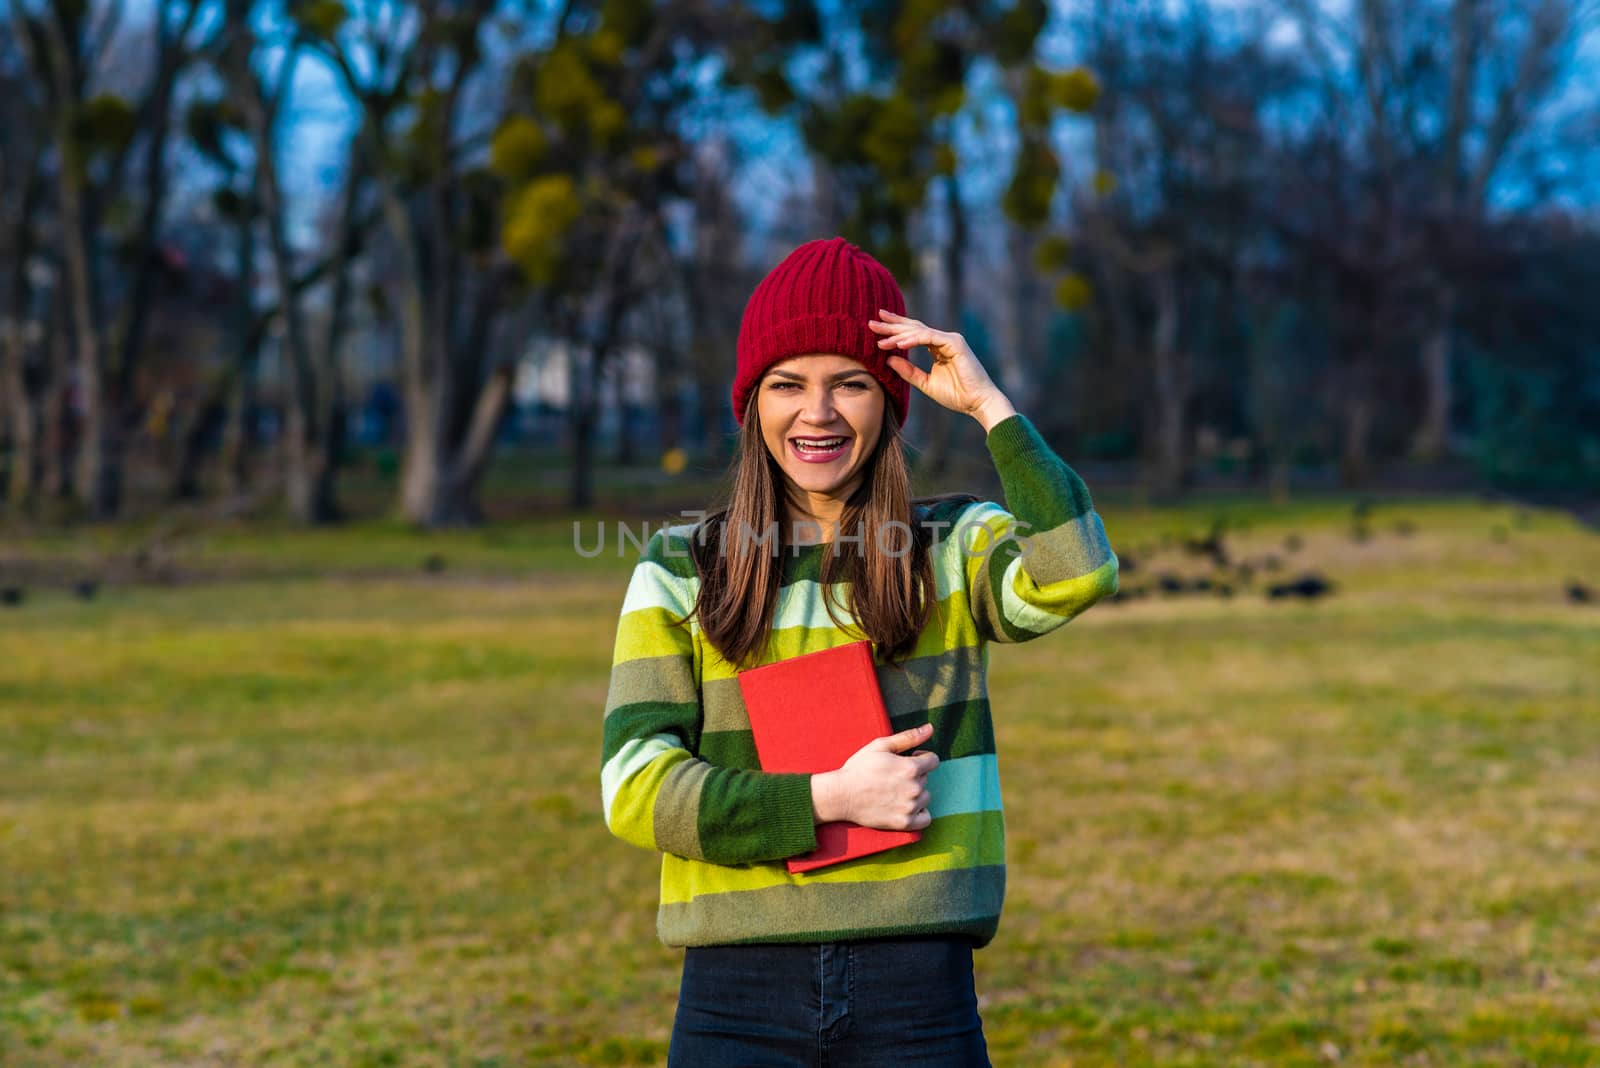 A teenager girl in red hat and green striped sweater is laughing andholding book with red cover while standing on a lawn in a park